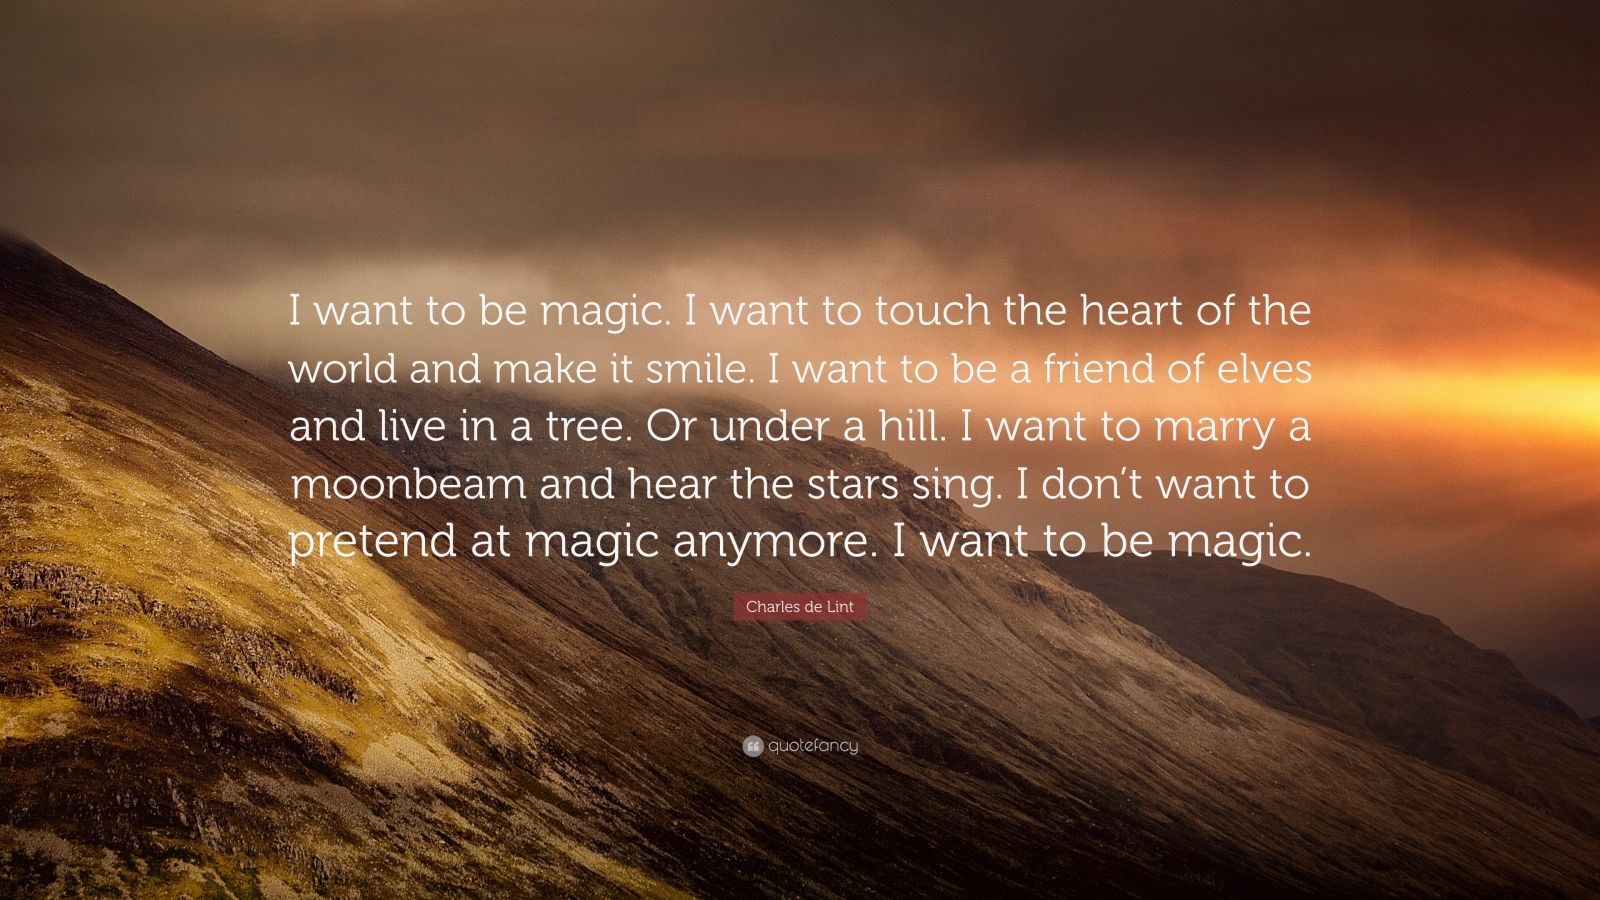 Charles de Lint Quote: “I want to be magic. I want to touch the heart ...